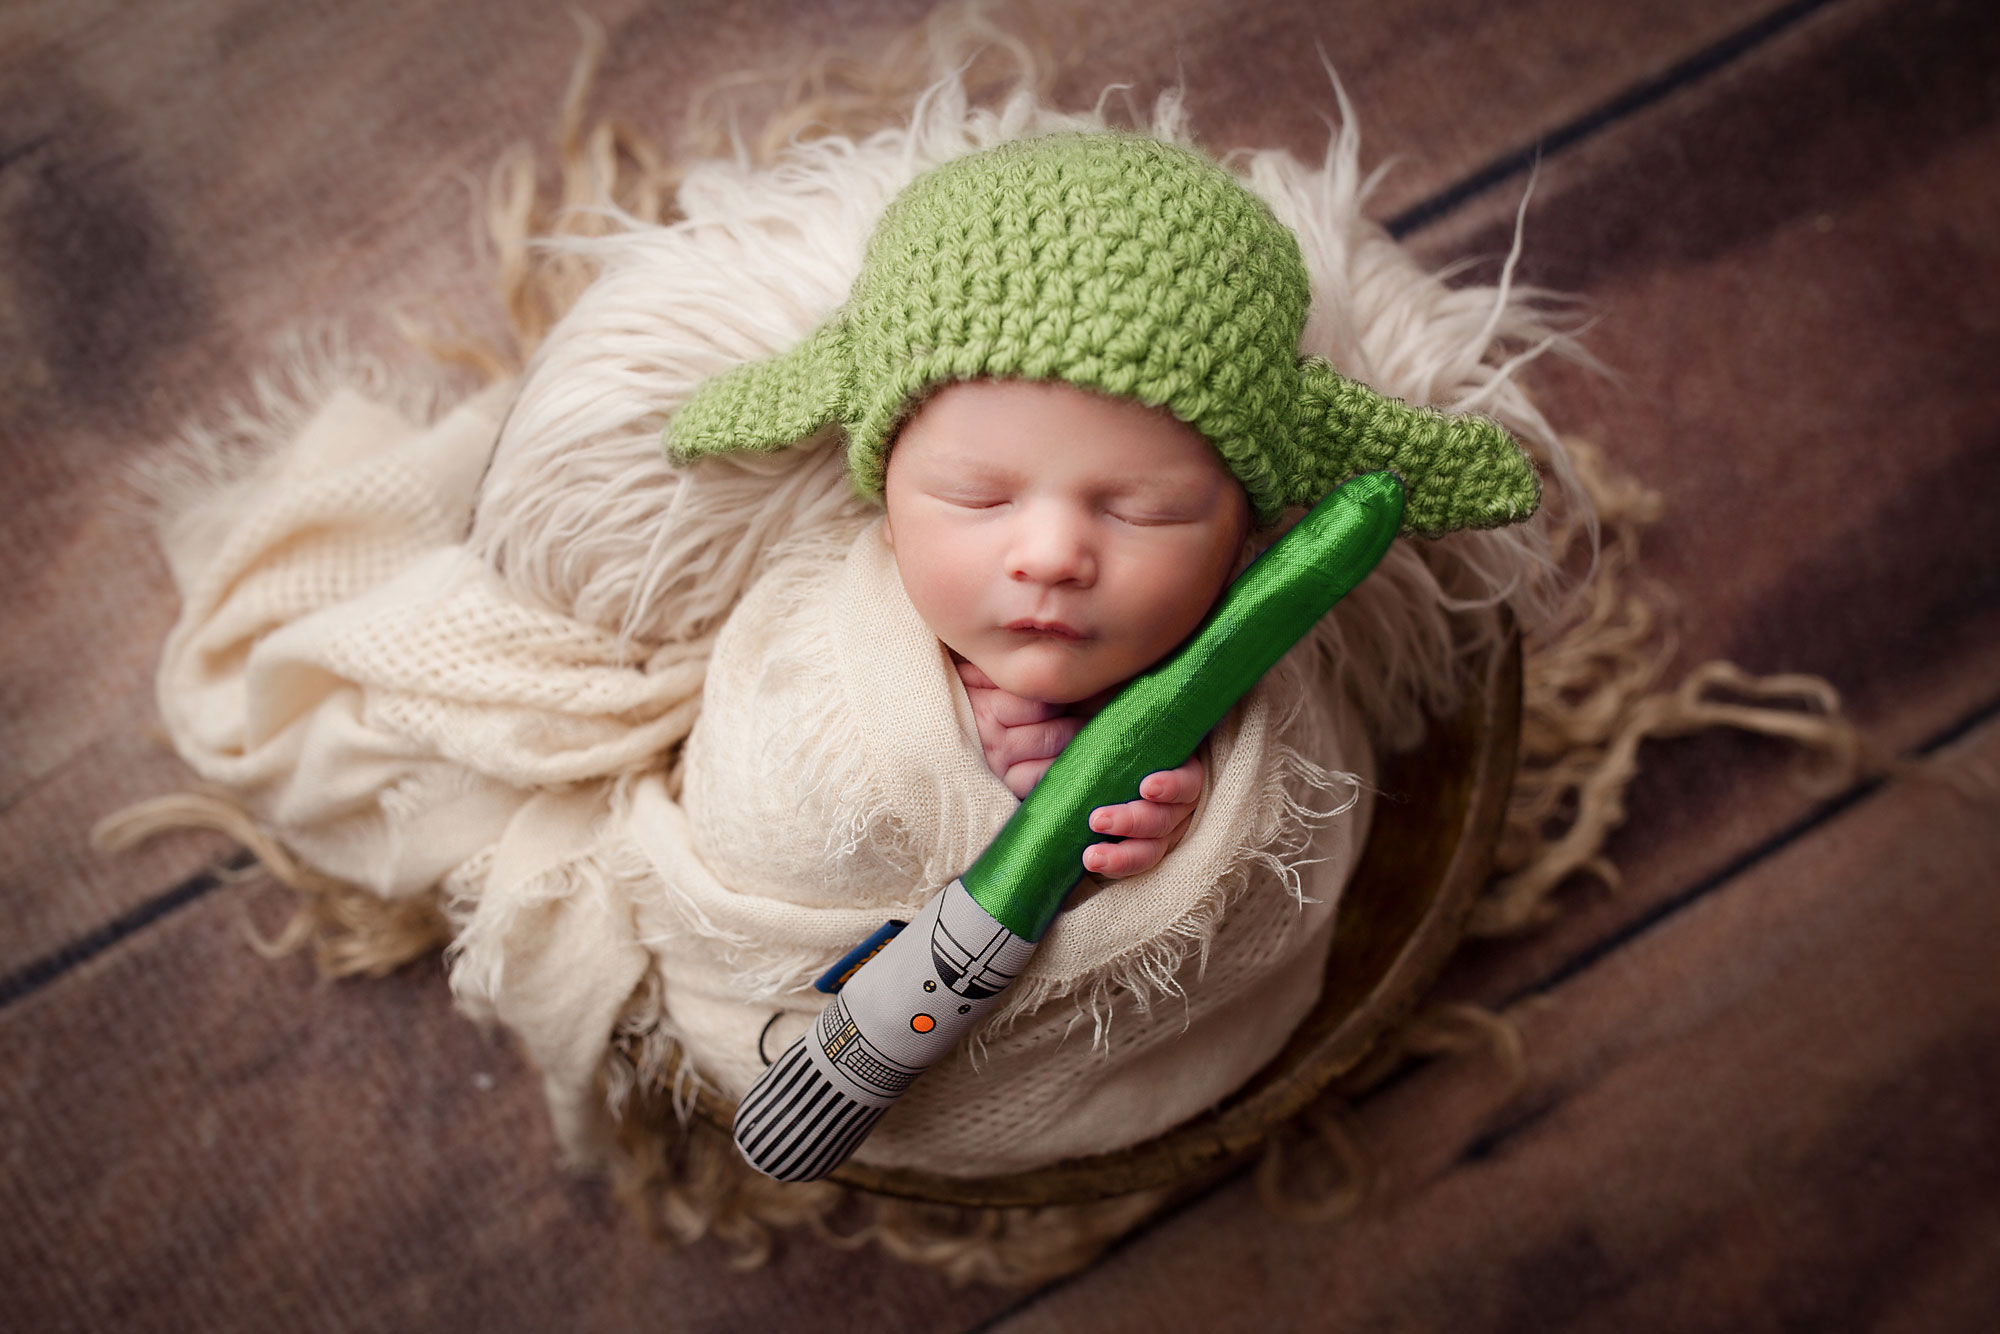 star wars baby pics, baby in yoda hat holding light saber